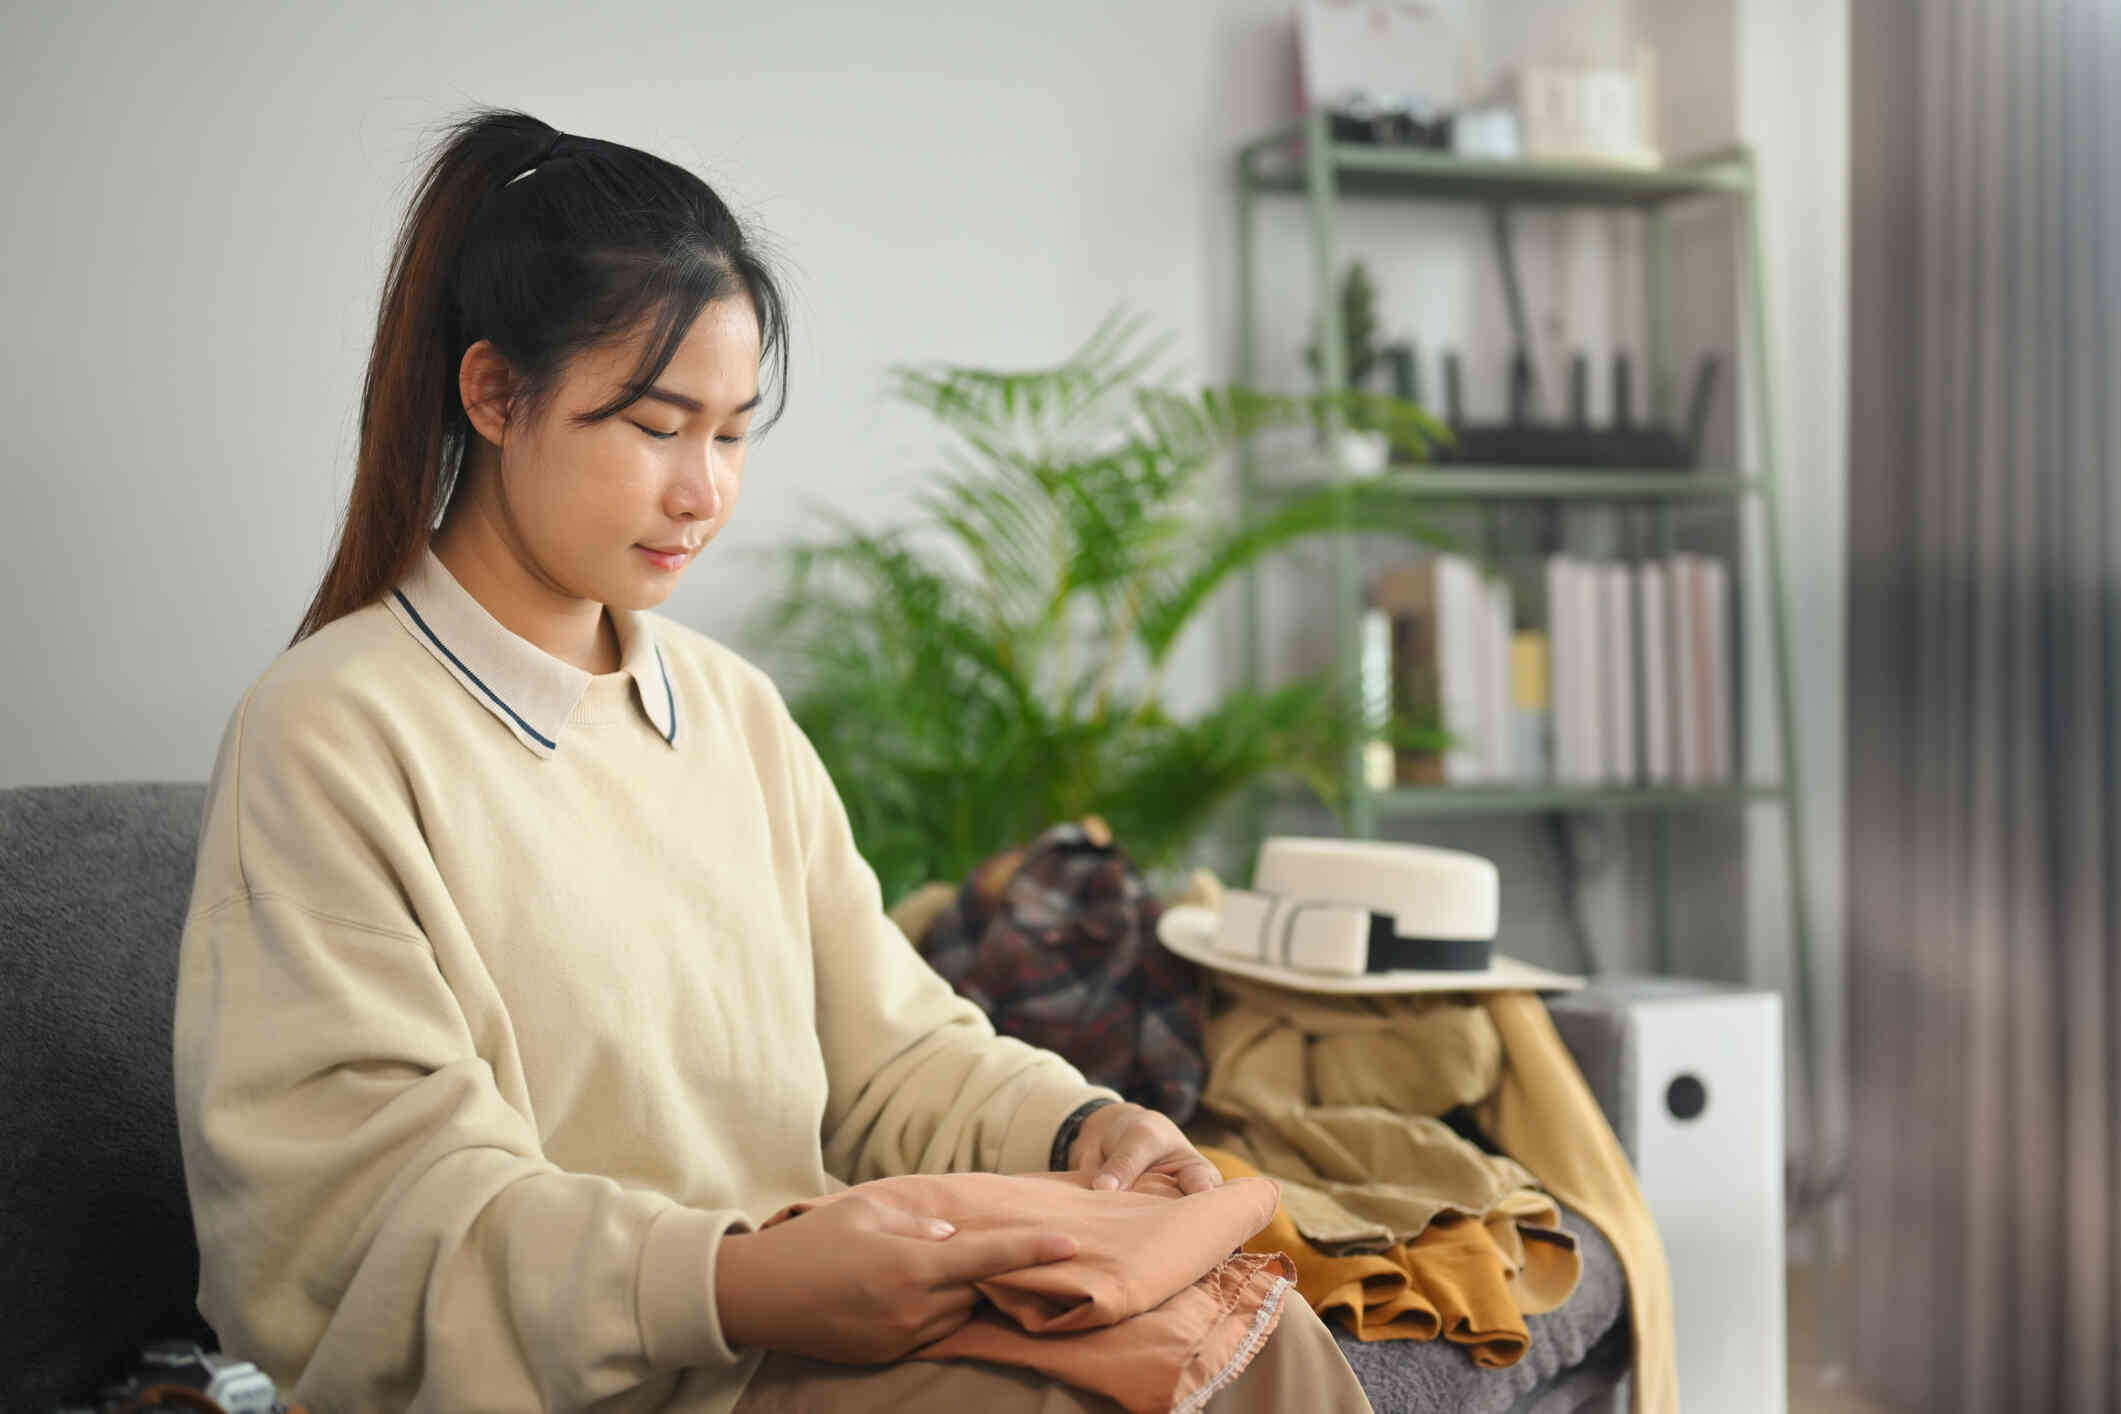 A woman in a tan sweater sits on the couch and folds some clothes in her lap.